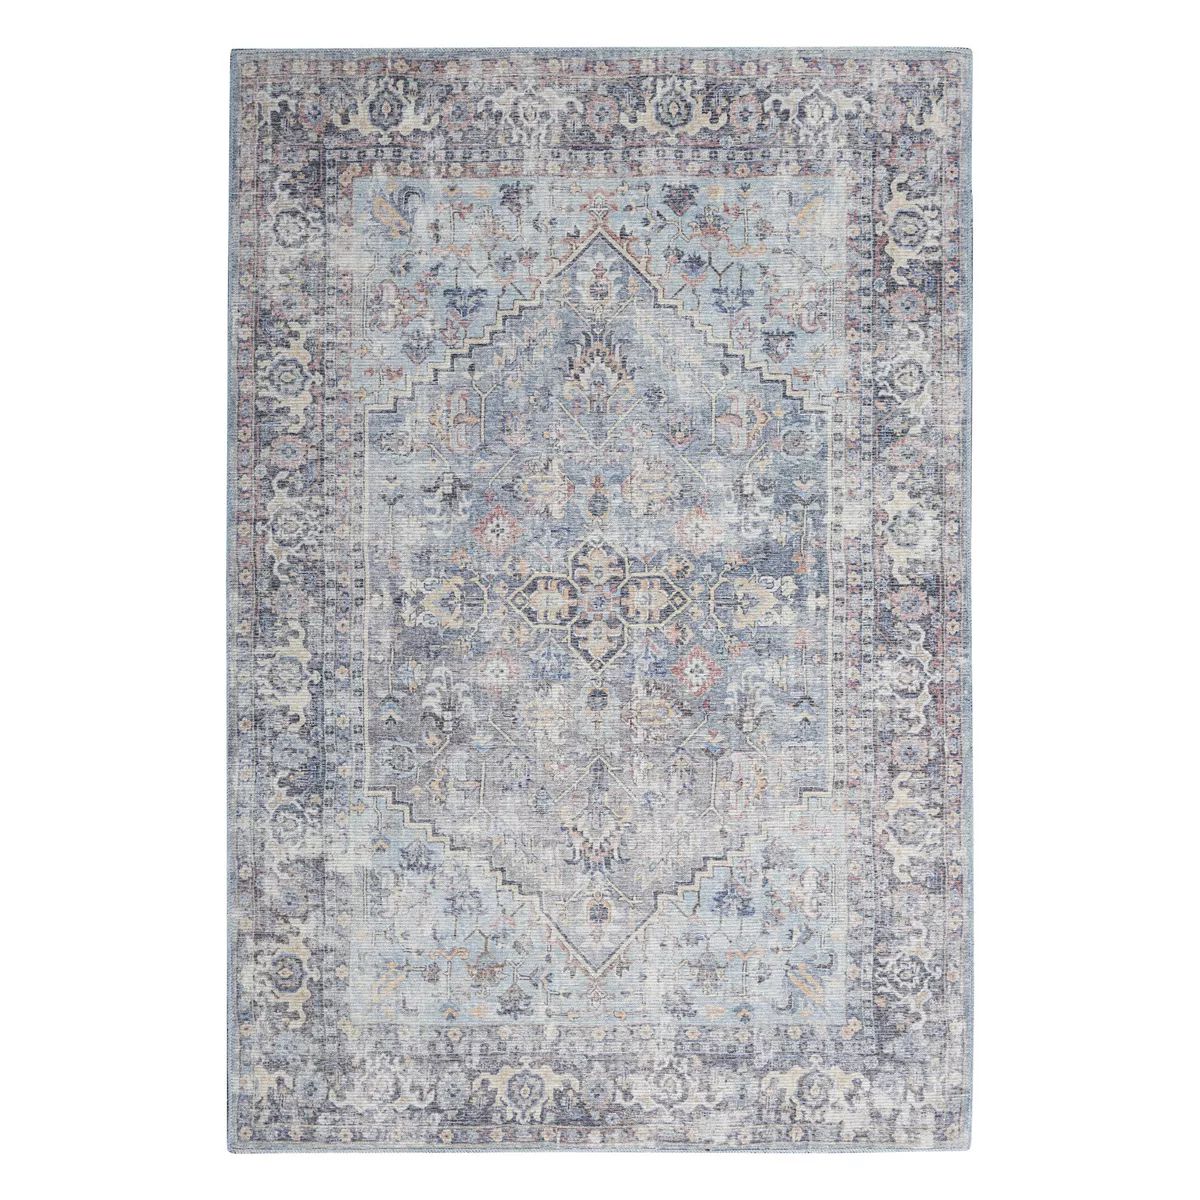 NC Series 1 Washable Medallion Area Rug by Nourison | Kohl's